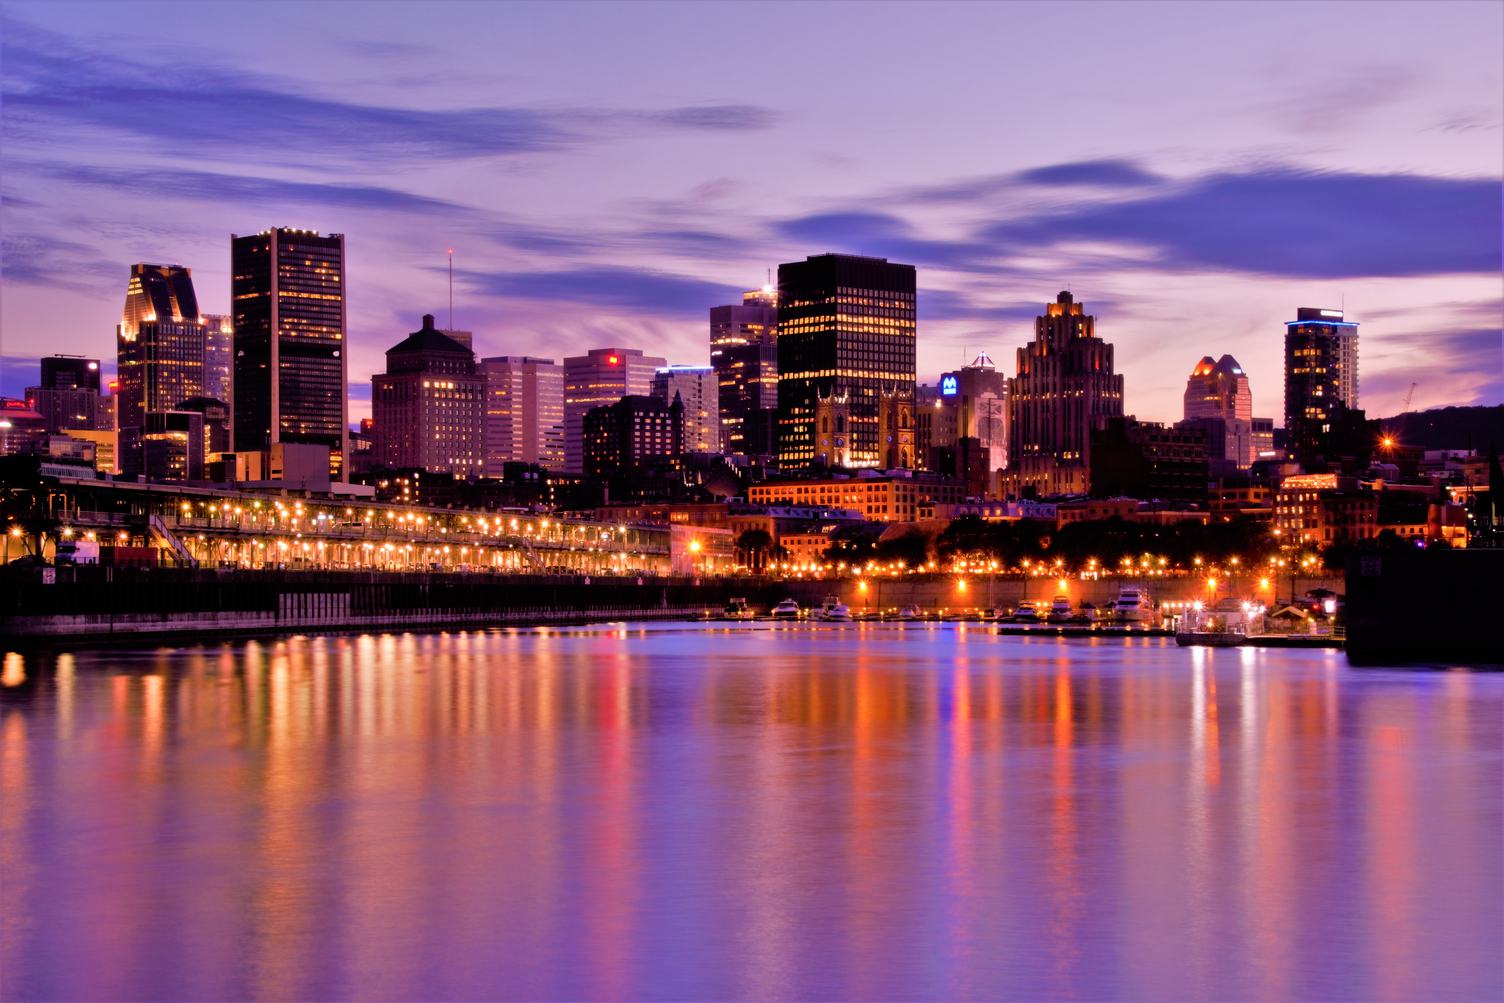 Montreal over River at Sunset